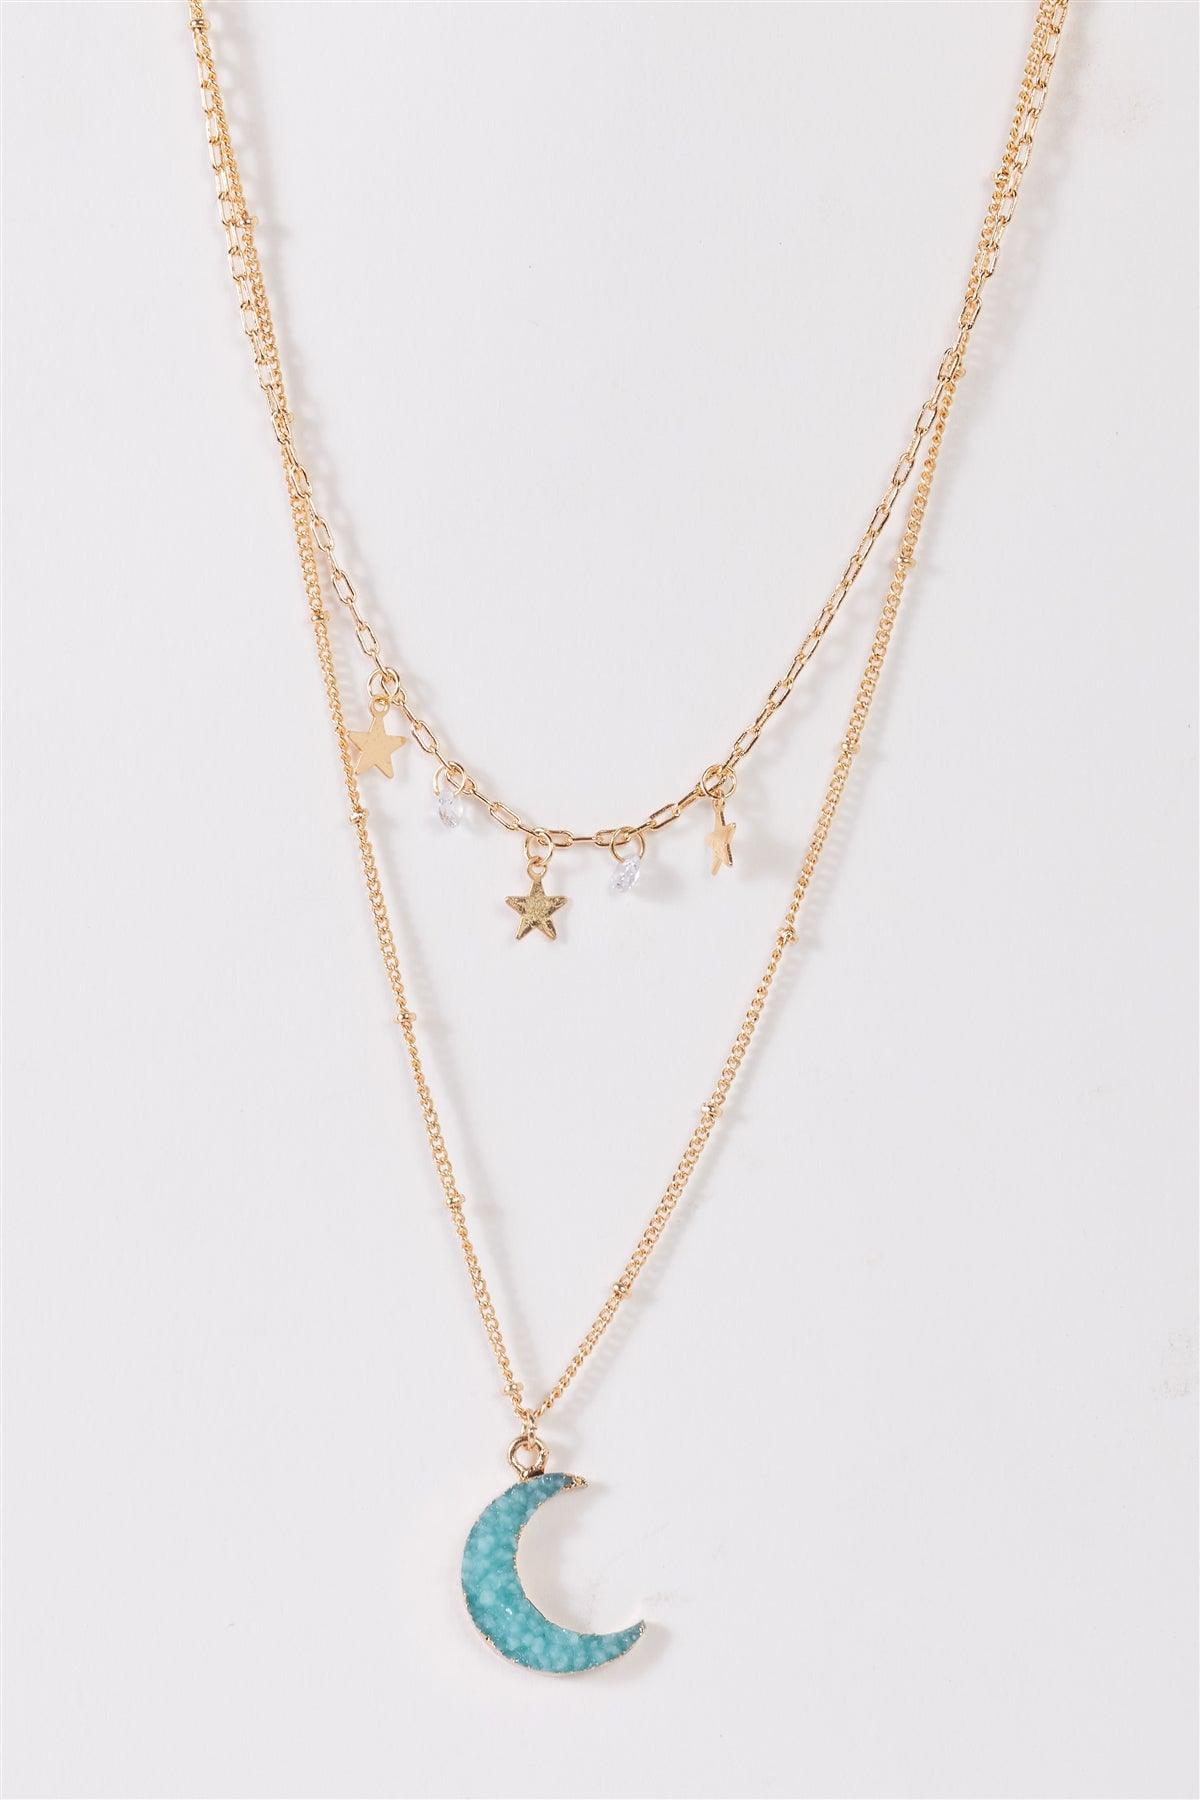 Gold Double Ball & Curb Chain With Moon Amazonite Faux Crystal Pendant And Link Chain With Stars & Faux Crystal Charms Necklace /3 Pieces